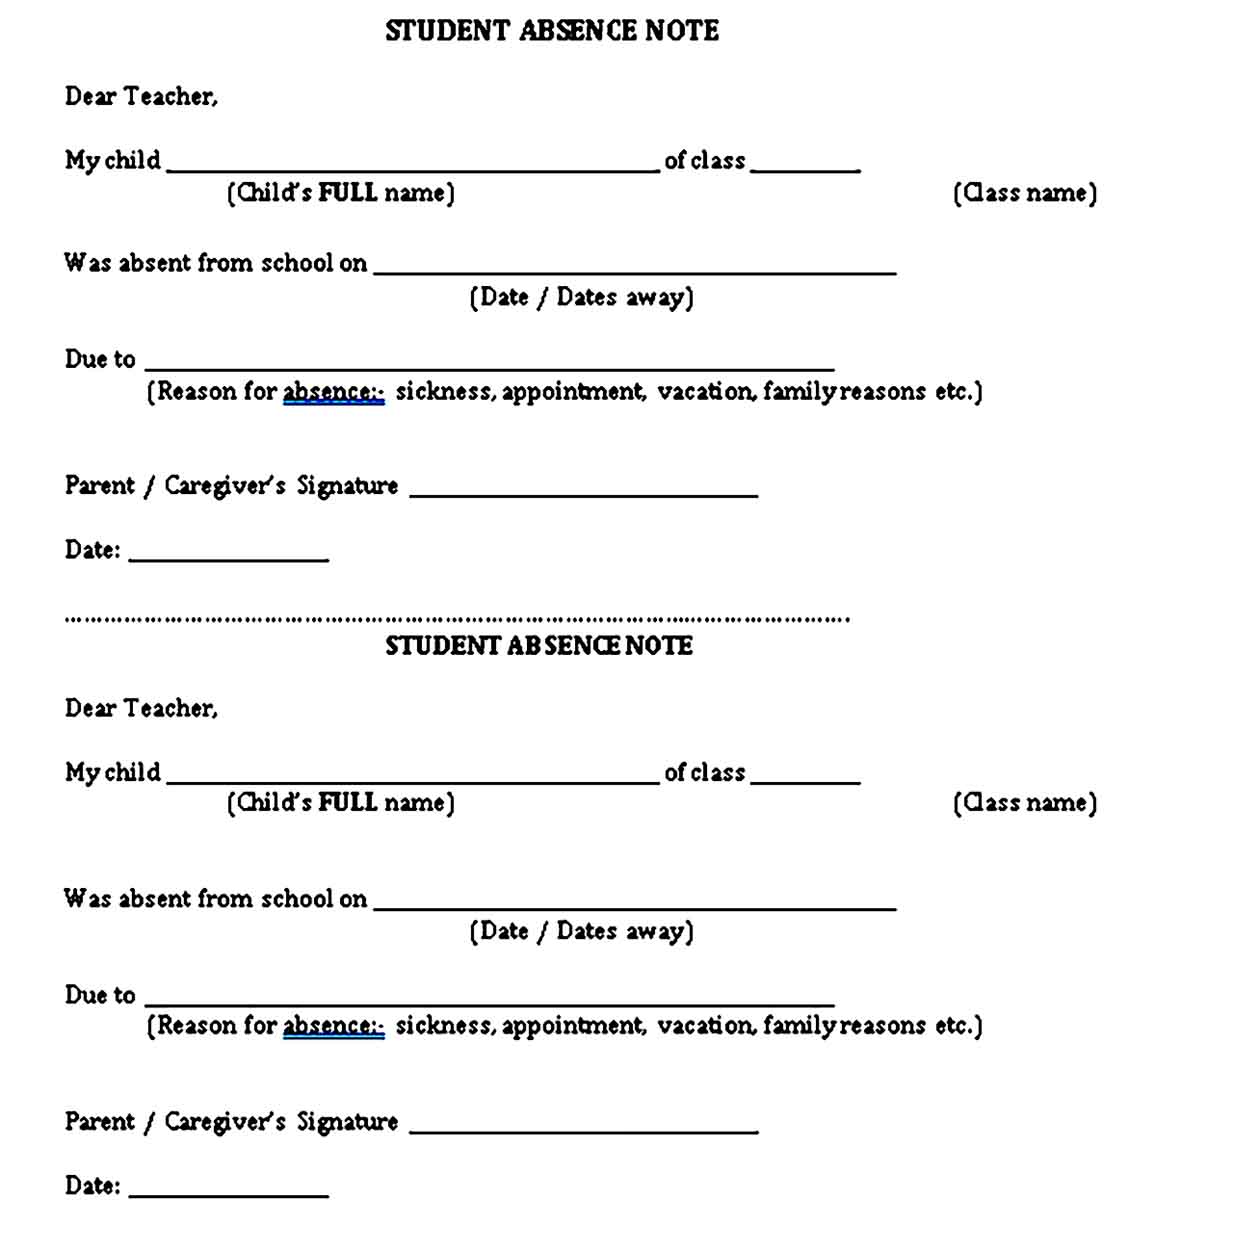 STUDENT ABSENCE NOTE